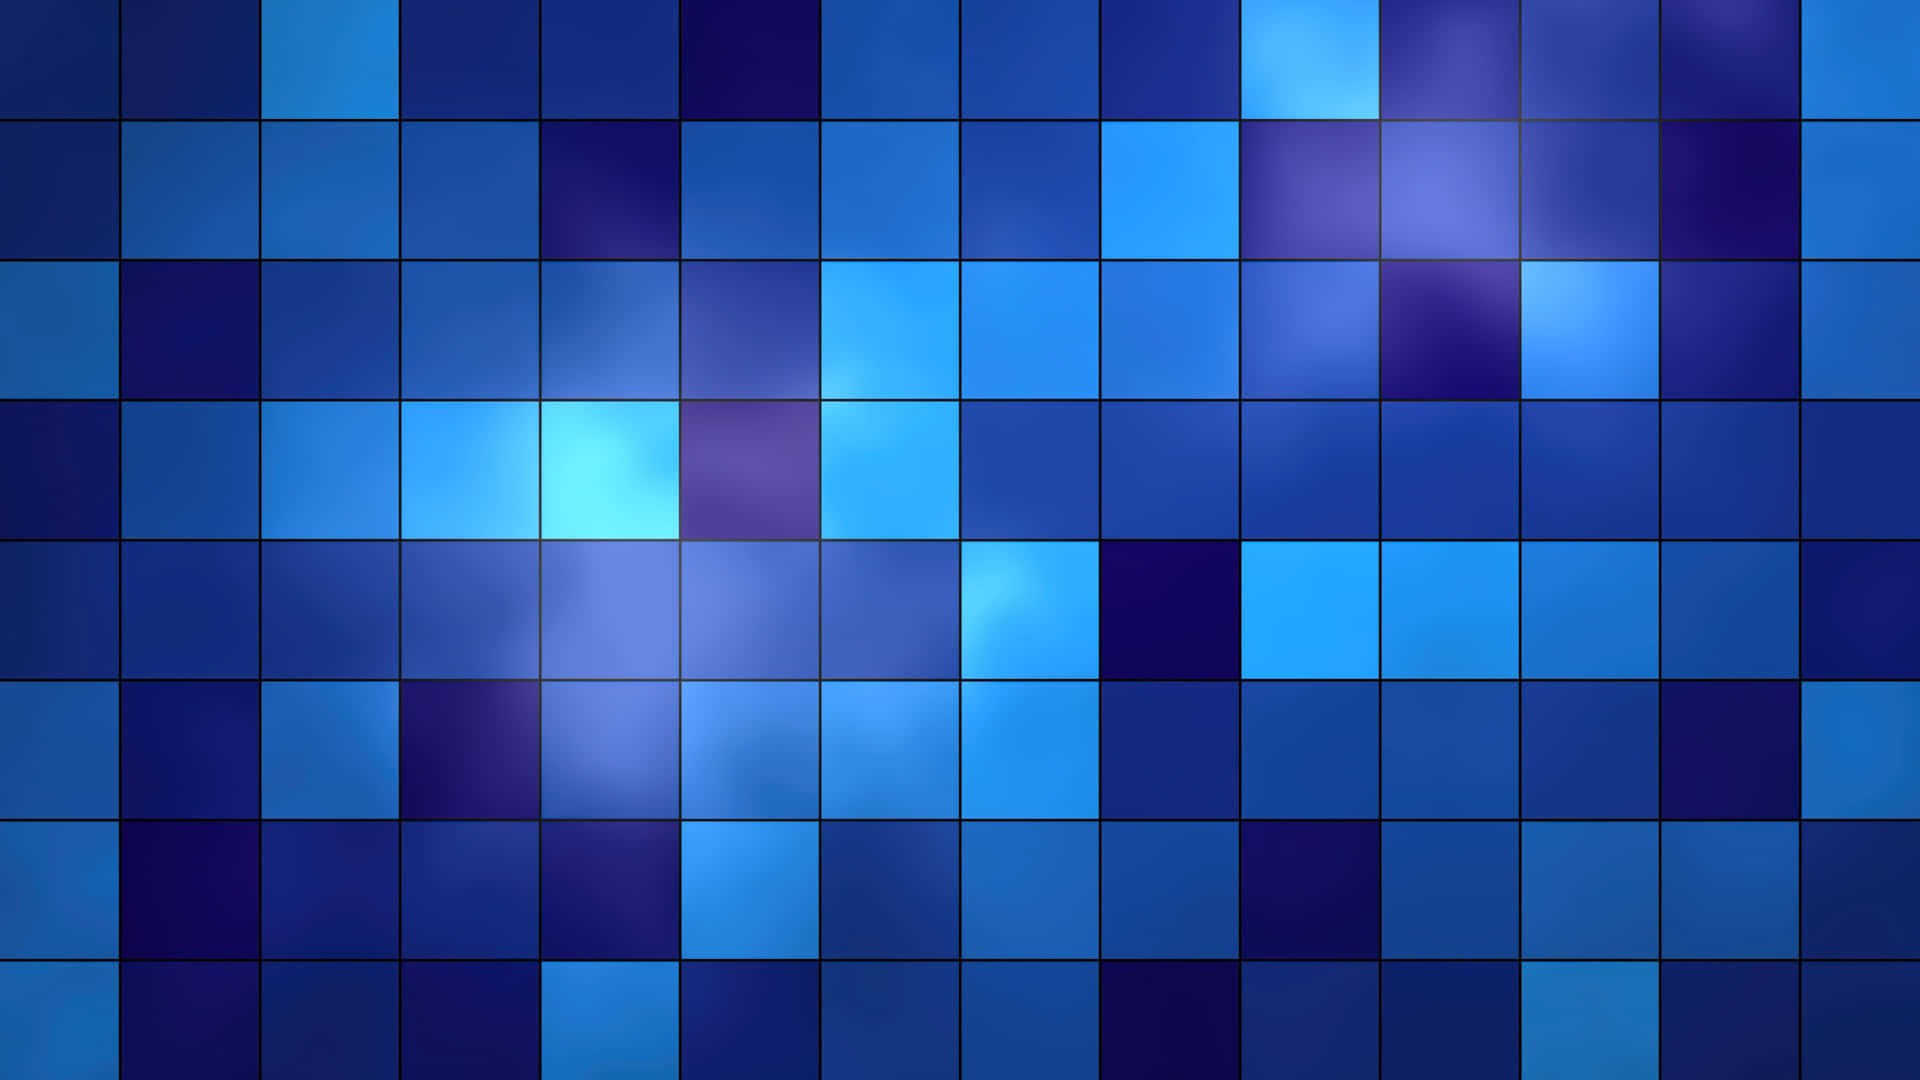 Blue Squares On A Blue Background